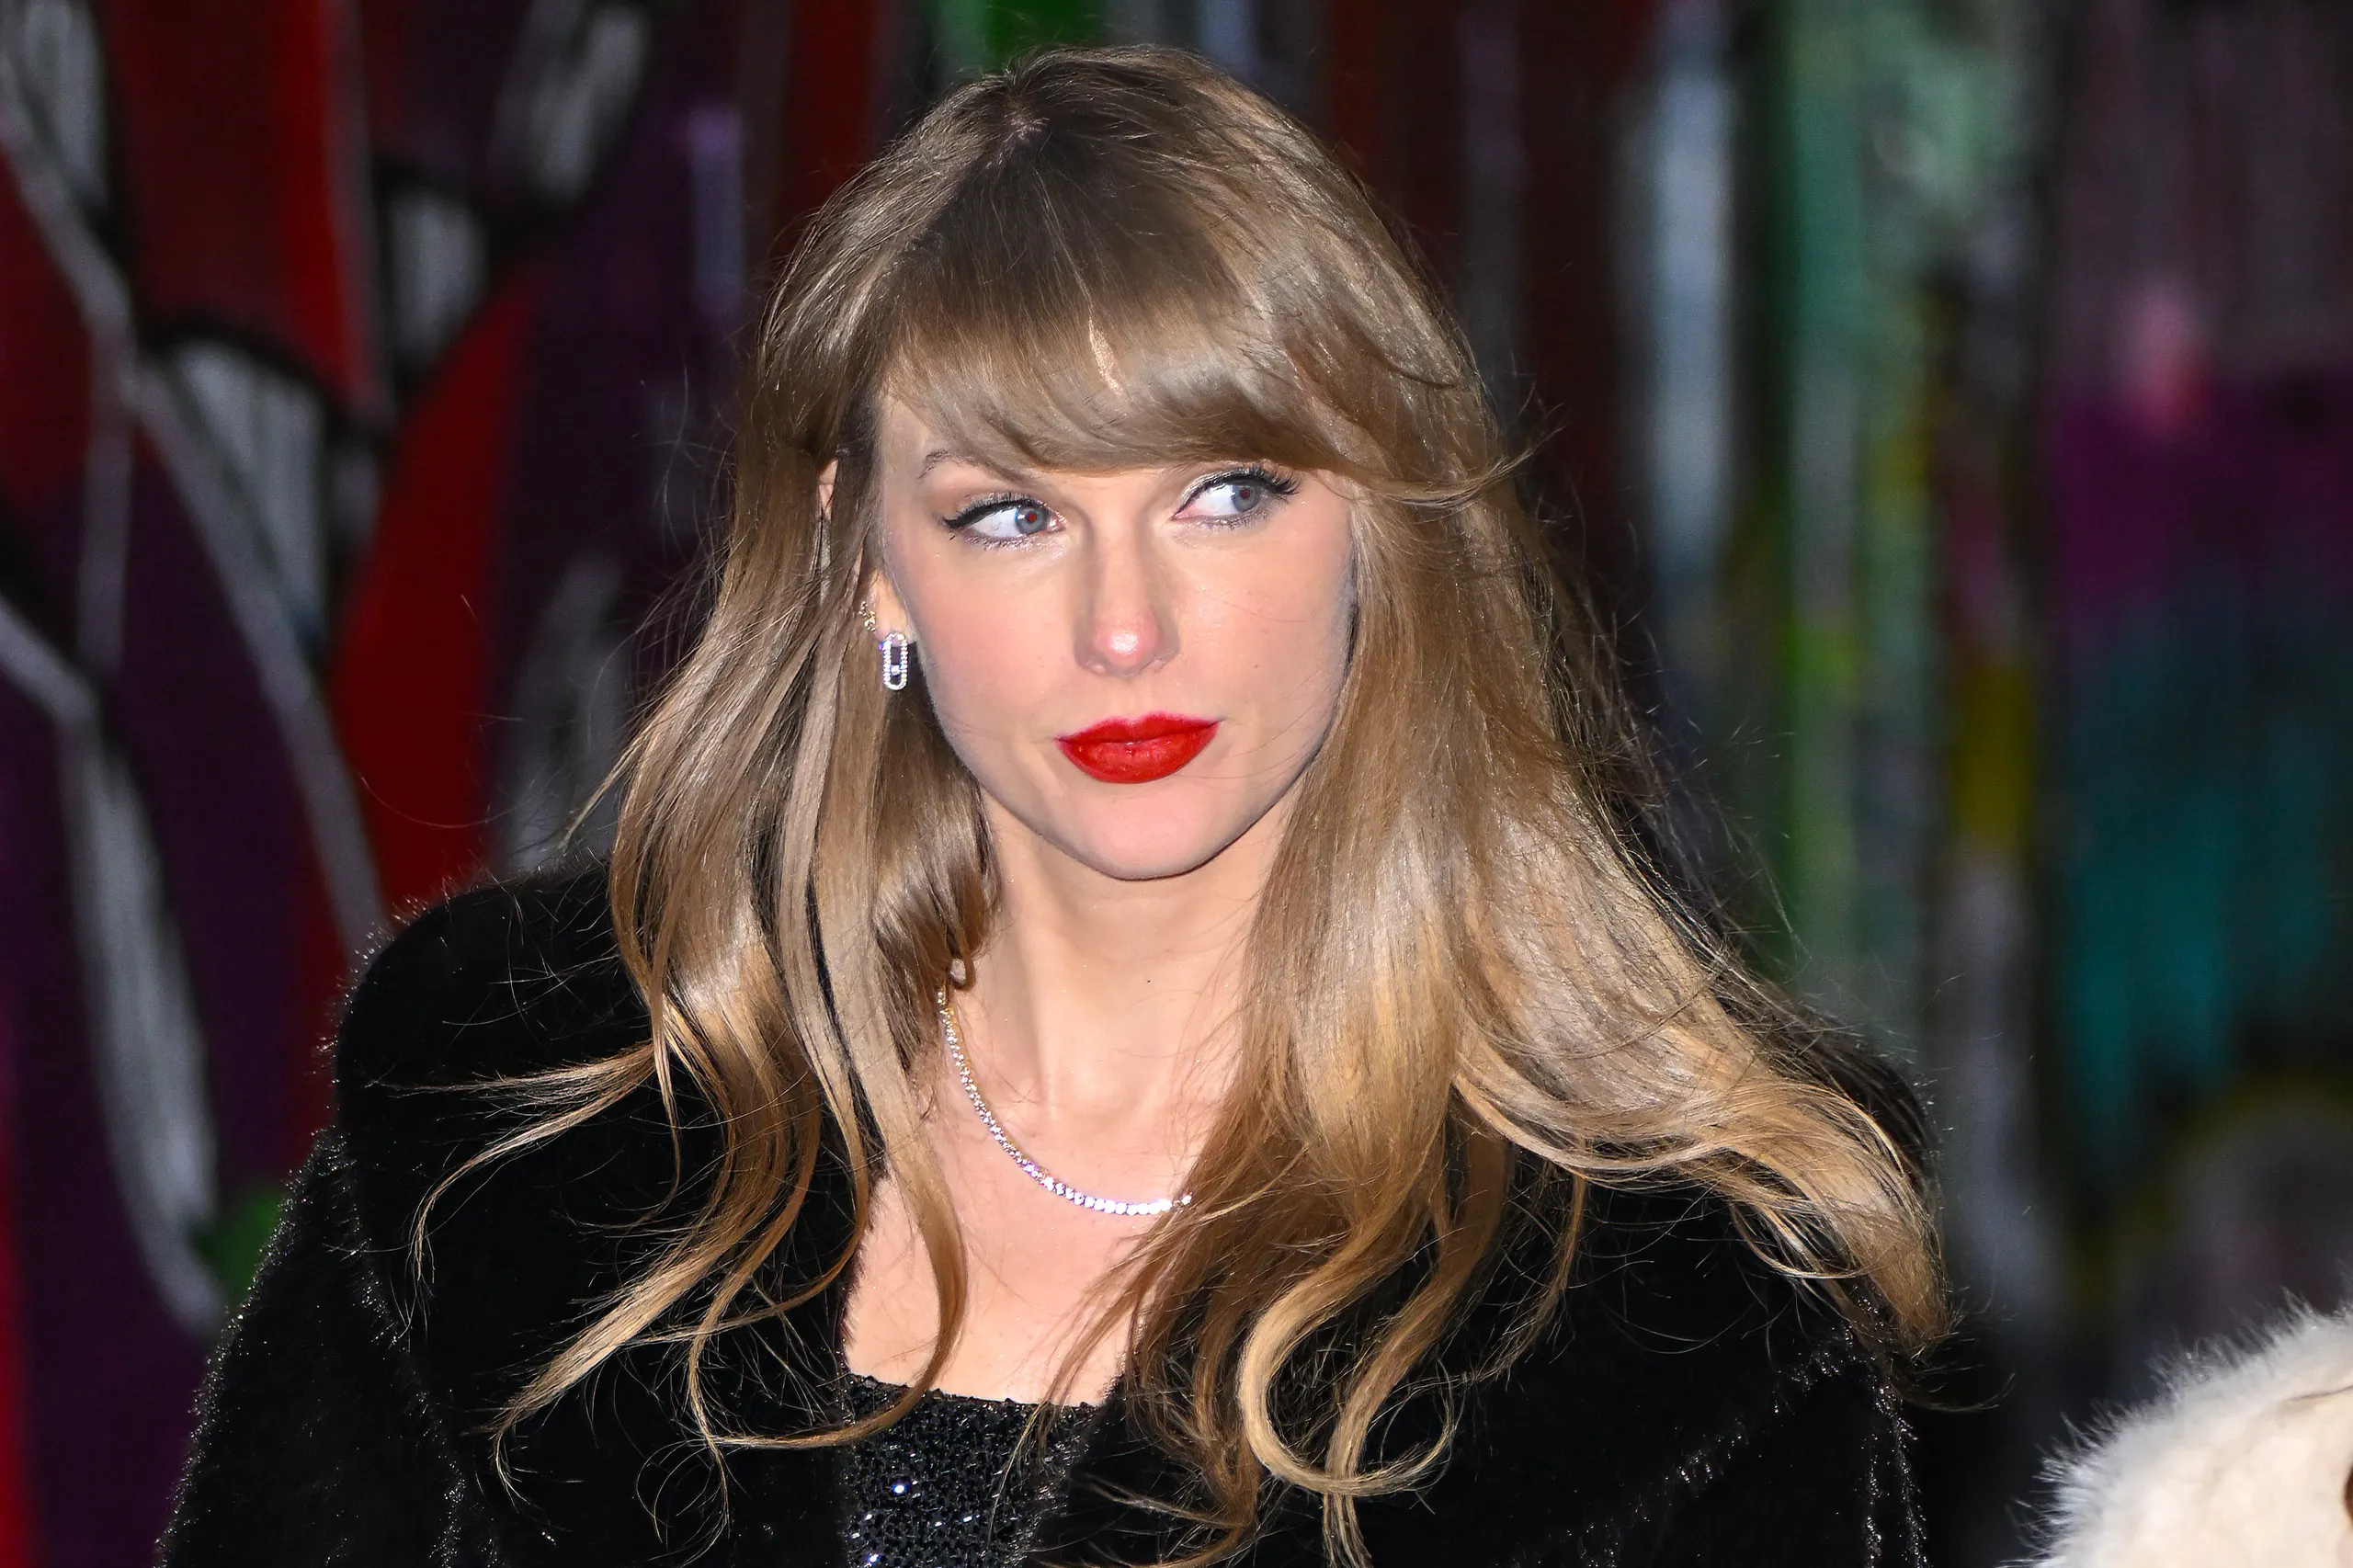 Taylor Swift: To party look της κόστιζε πάνω από 2000 ευρώ